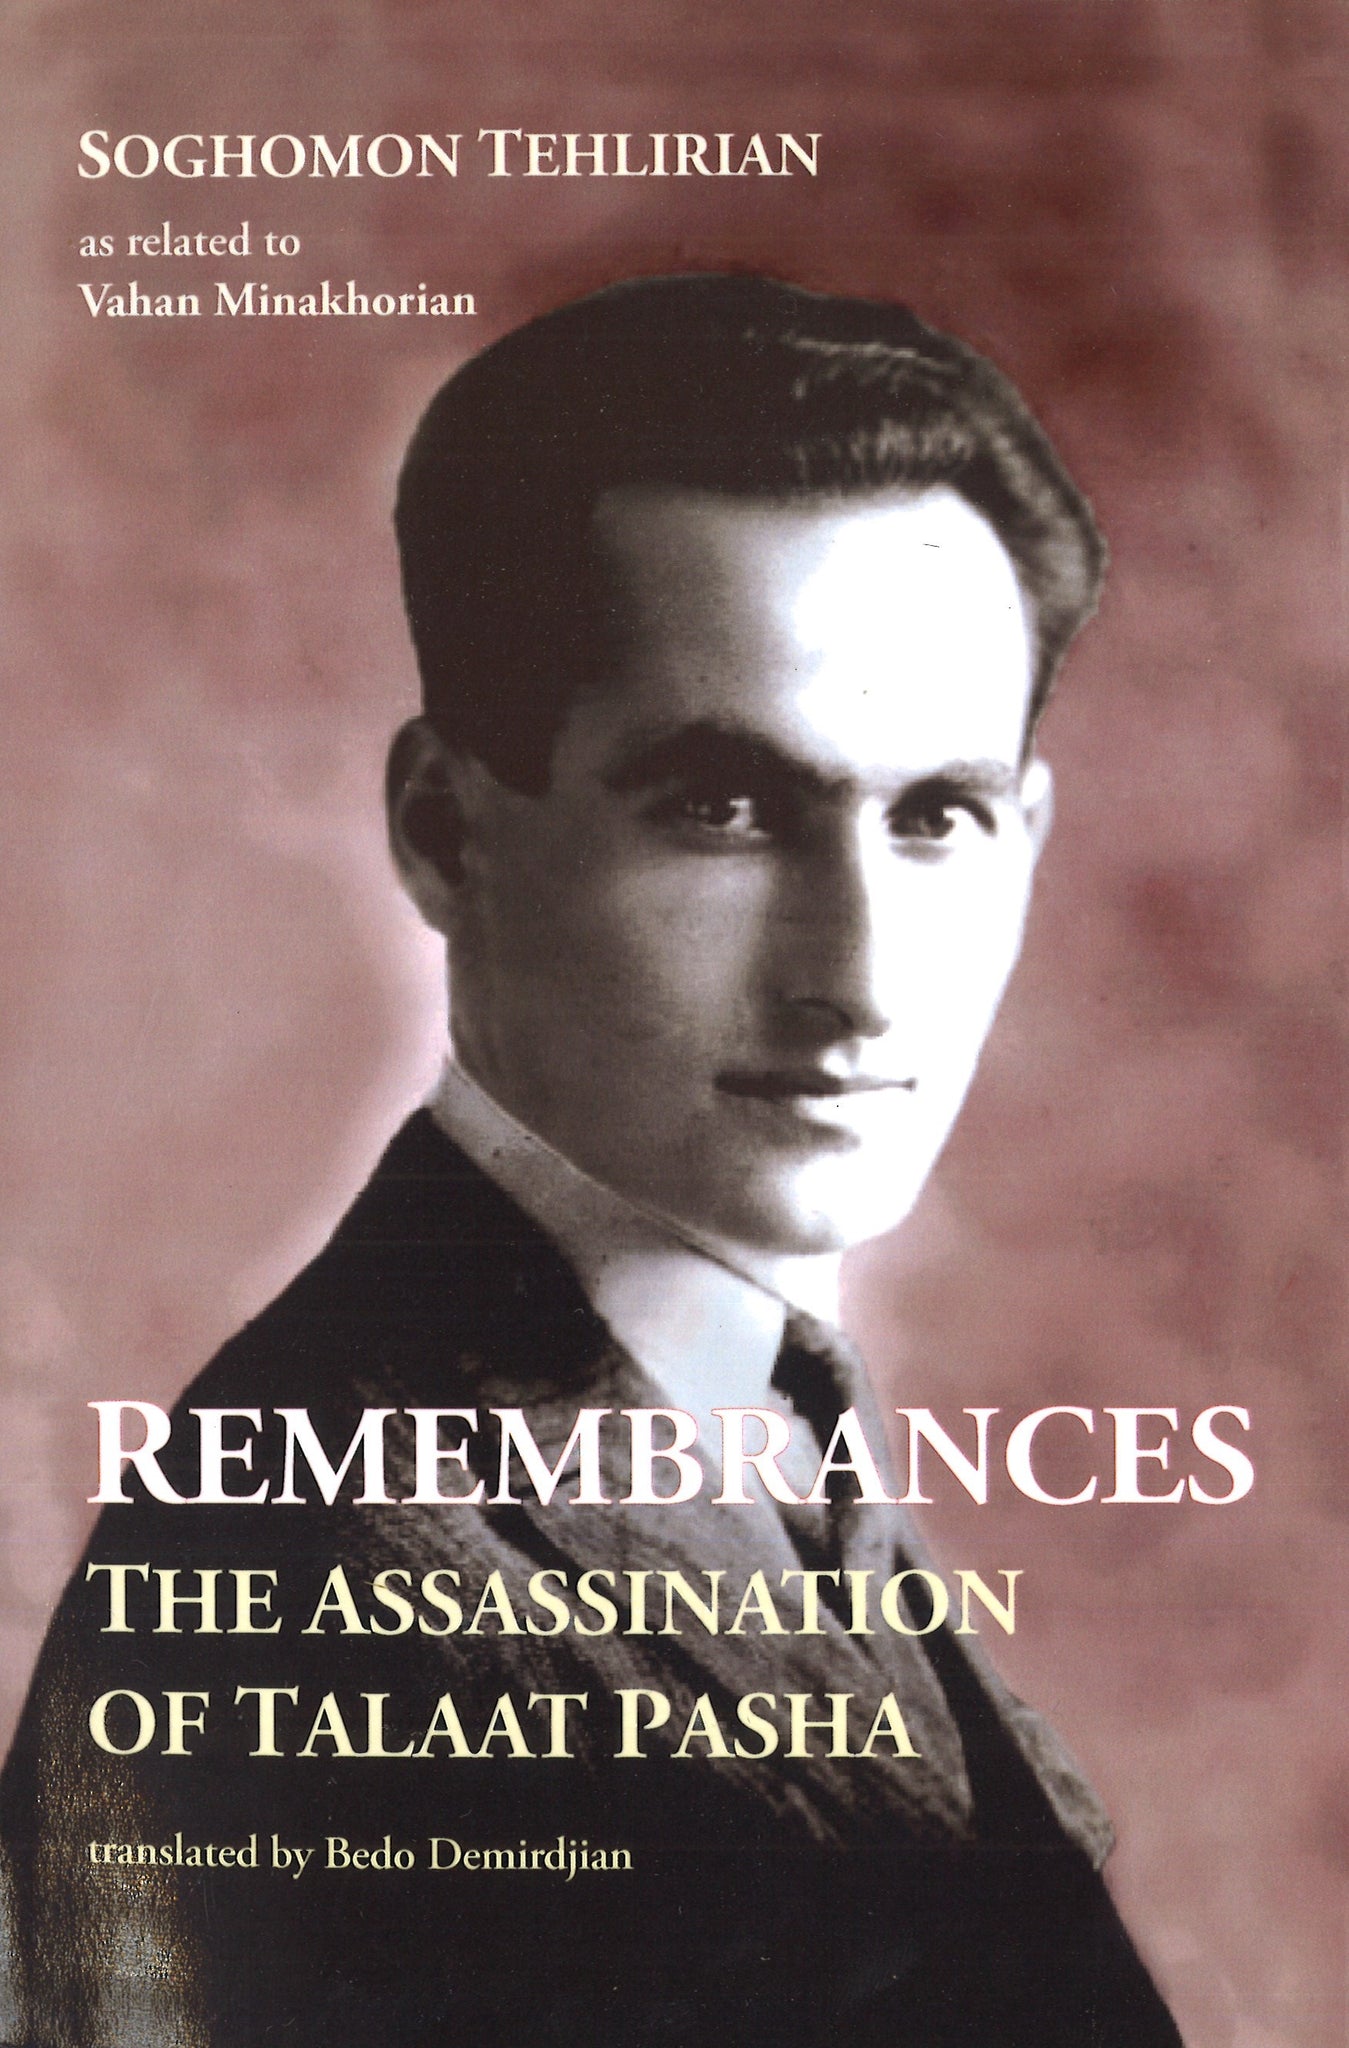 REMEMBRANCES ~ The Assassination of Talaat Pasha